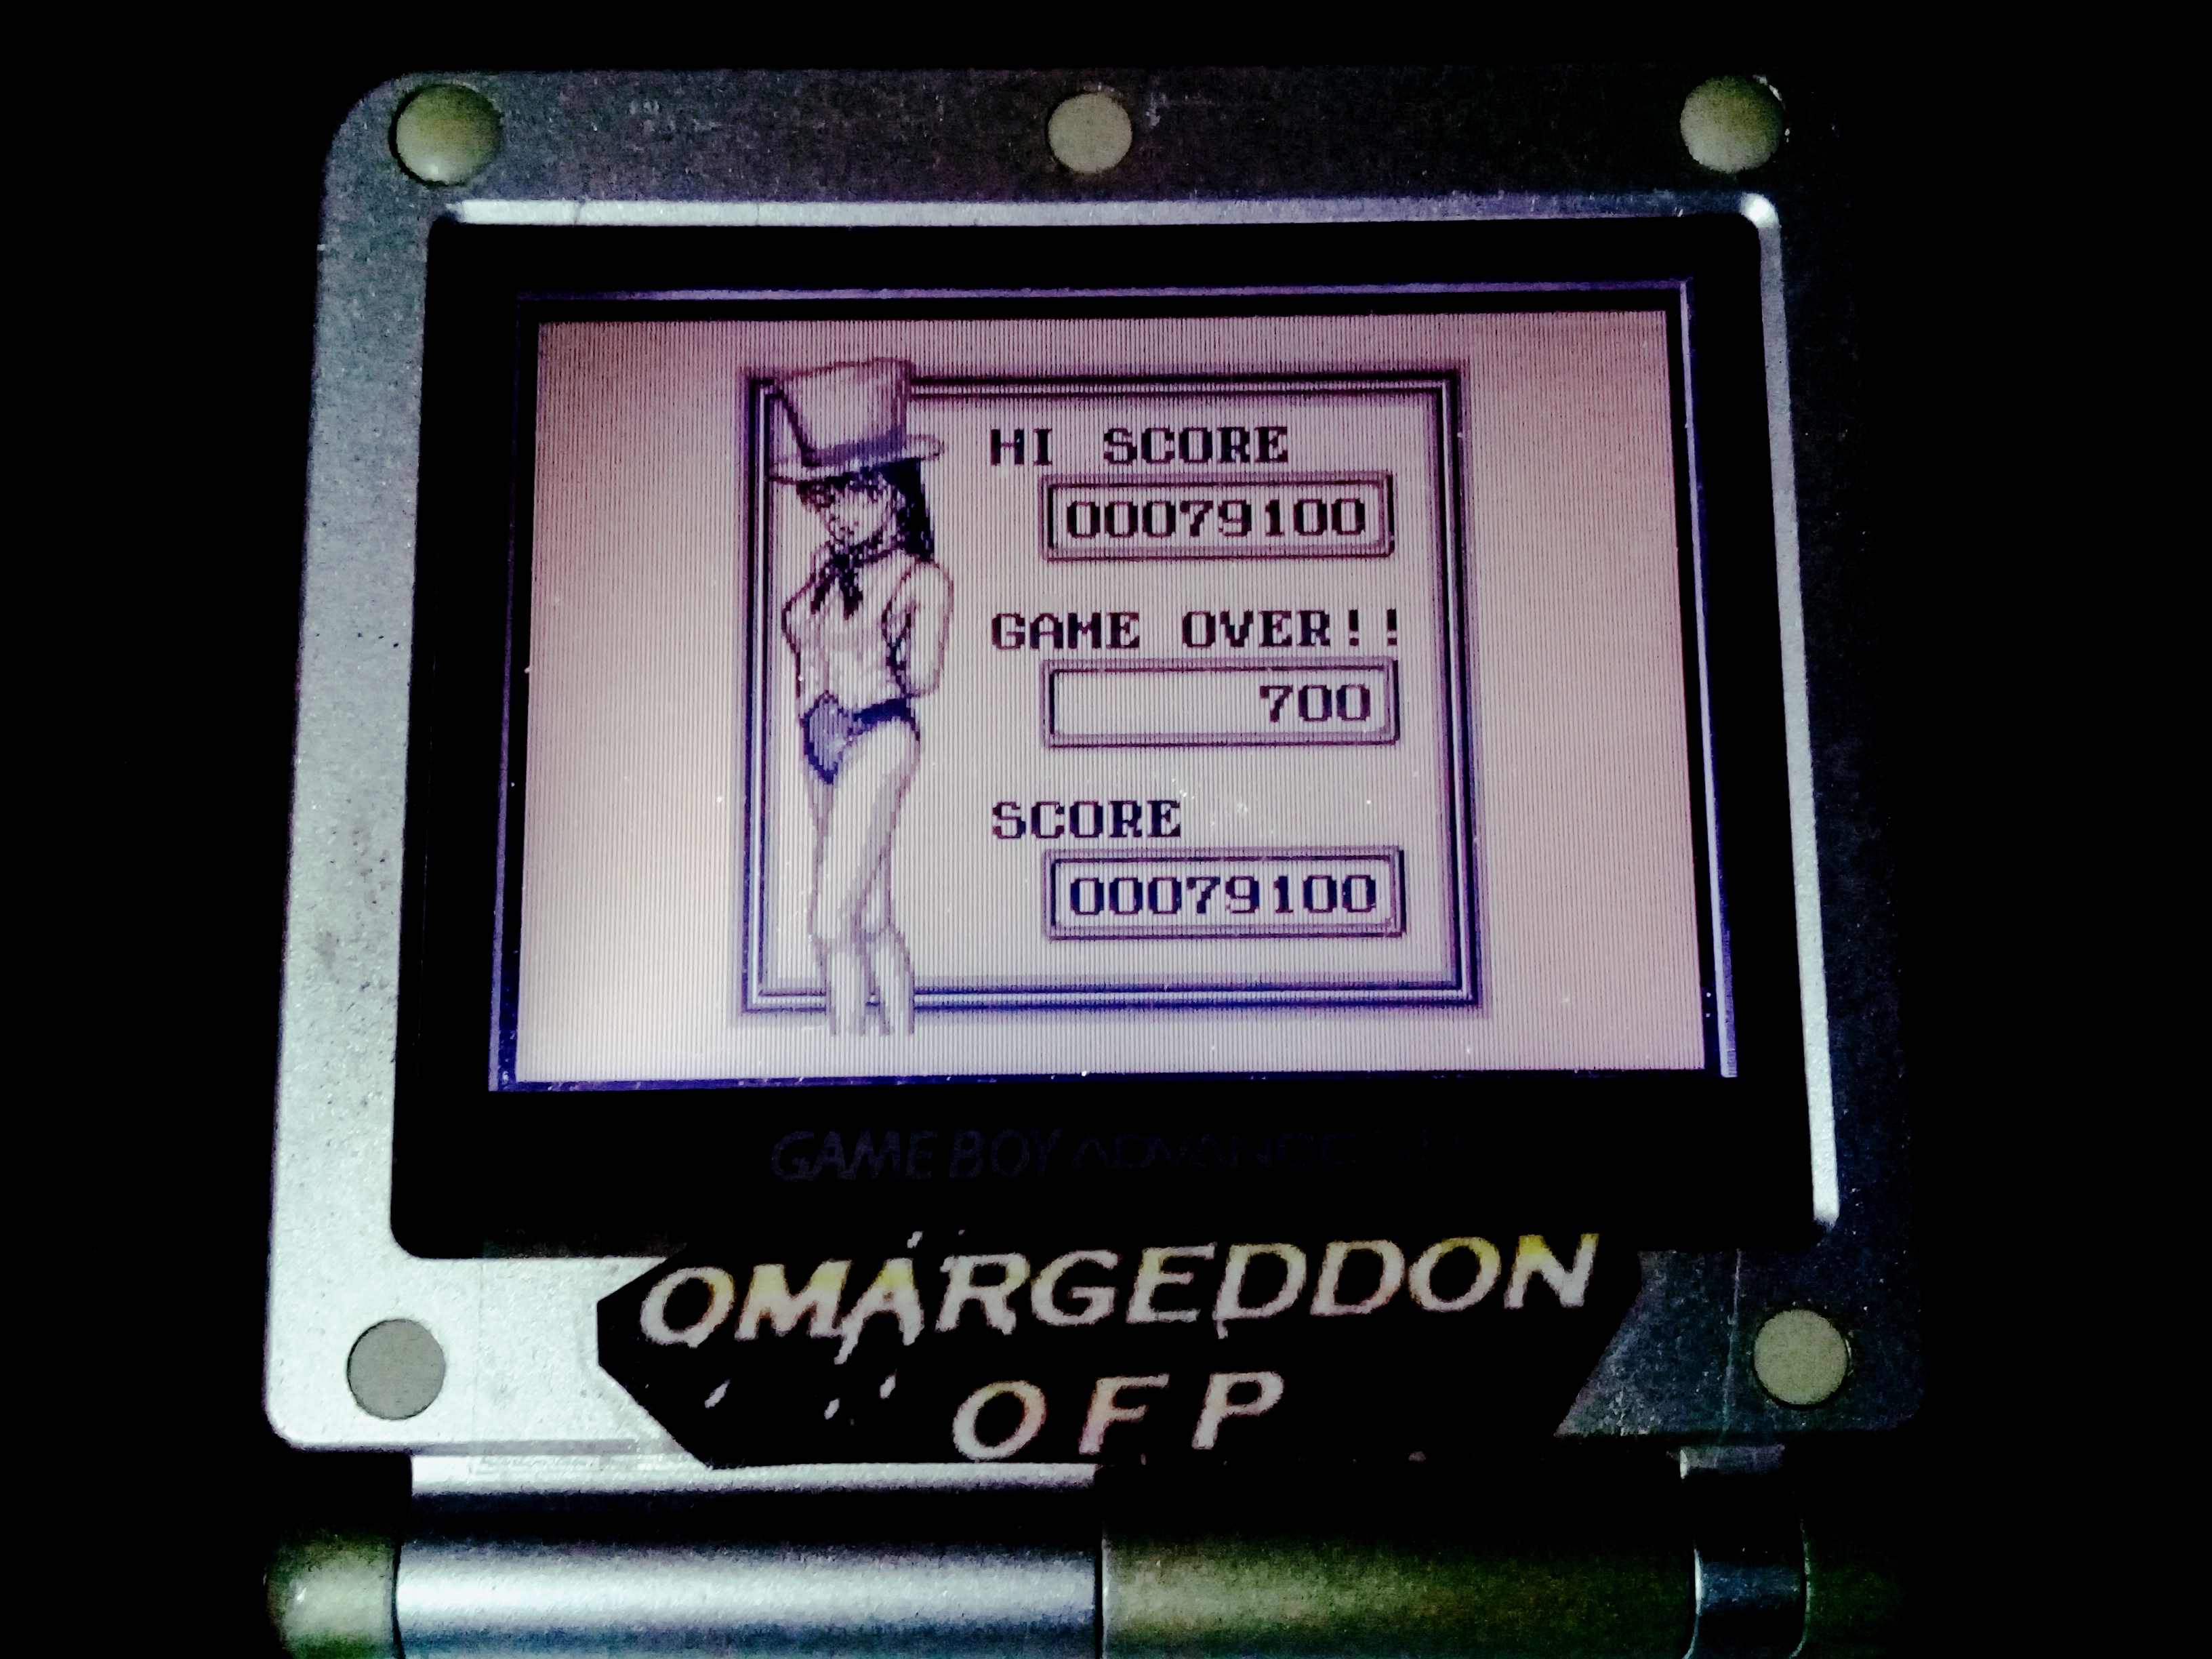 omargeddon: Pinball Party [Normal Game] (Game Boy) 79,100 points on 2020-09-14 01:38:24